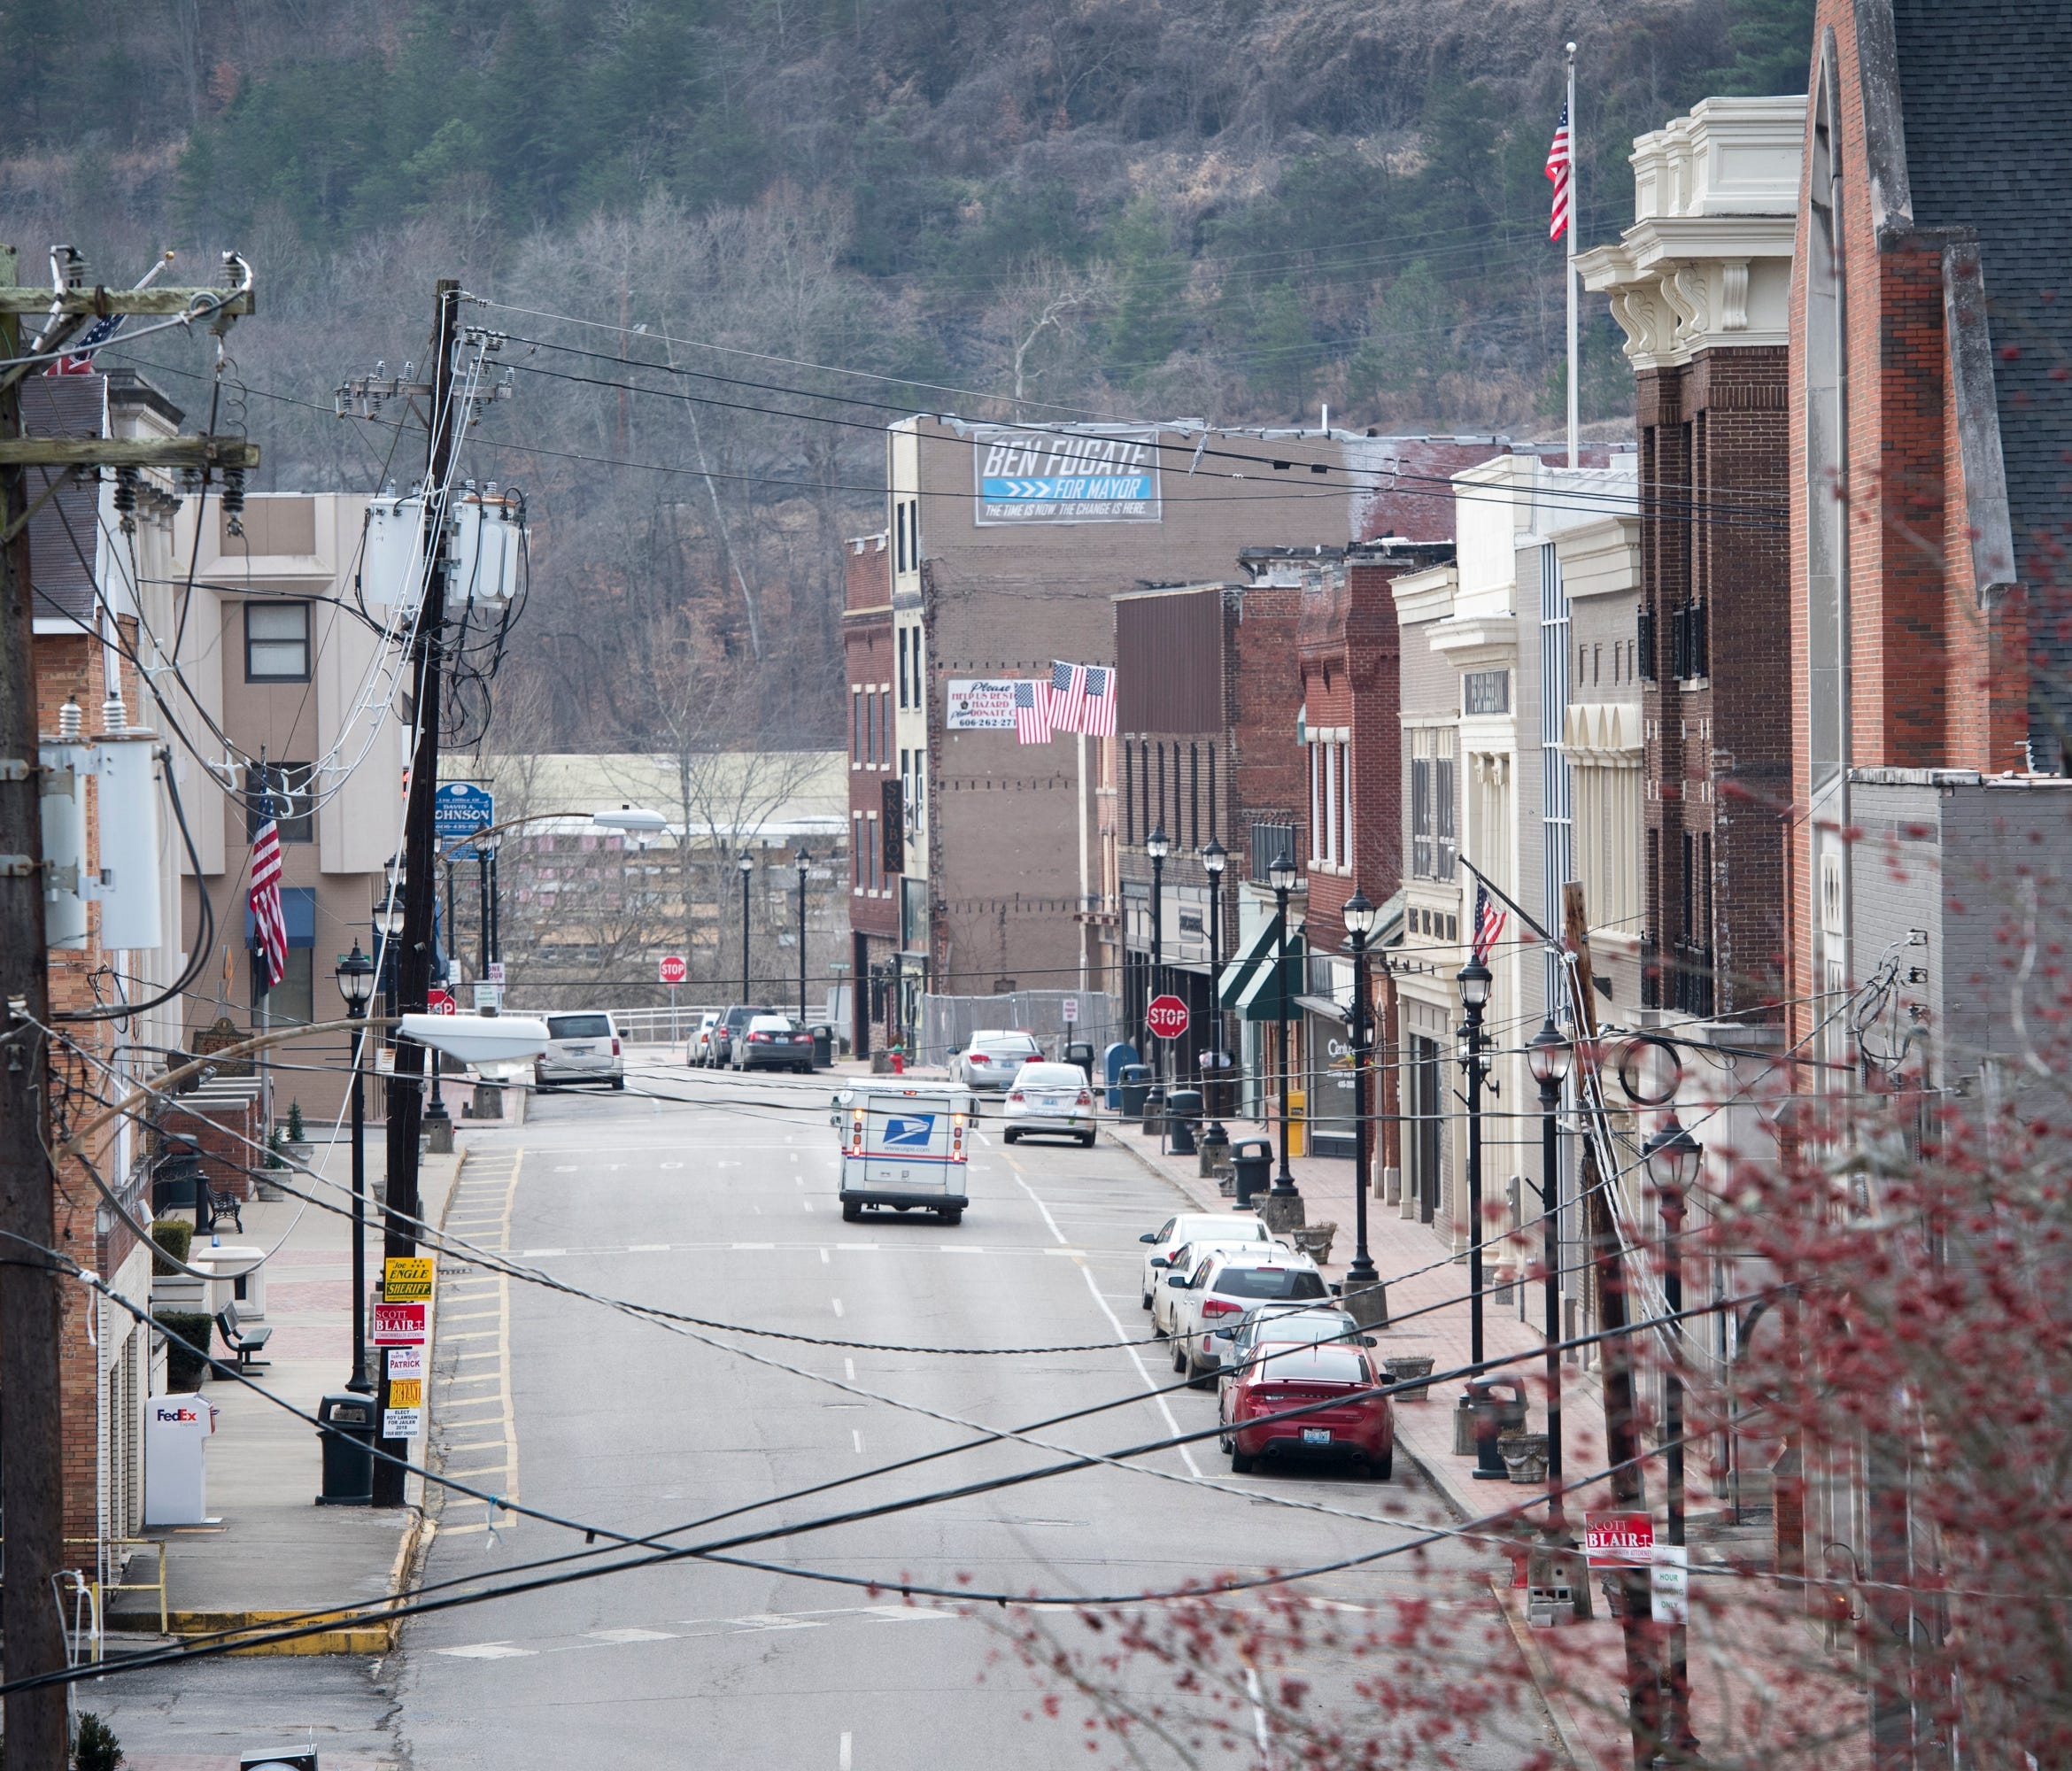 A view down Main Street in the small town of Hazard, Ky., on a quiet Saturday morning. Shorter life expectancy is particularly acute among whites in rural areas of the U.S. such as Hazard, which is over 90% white.